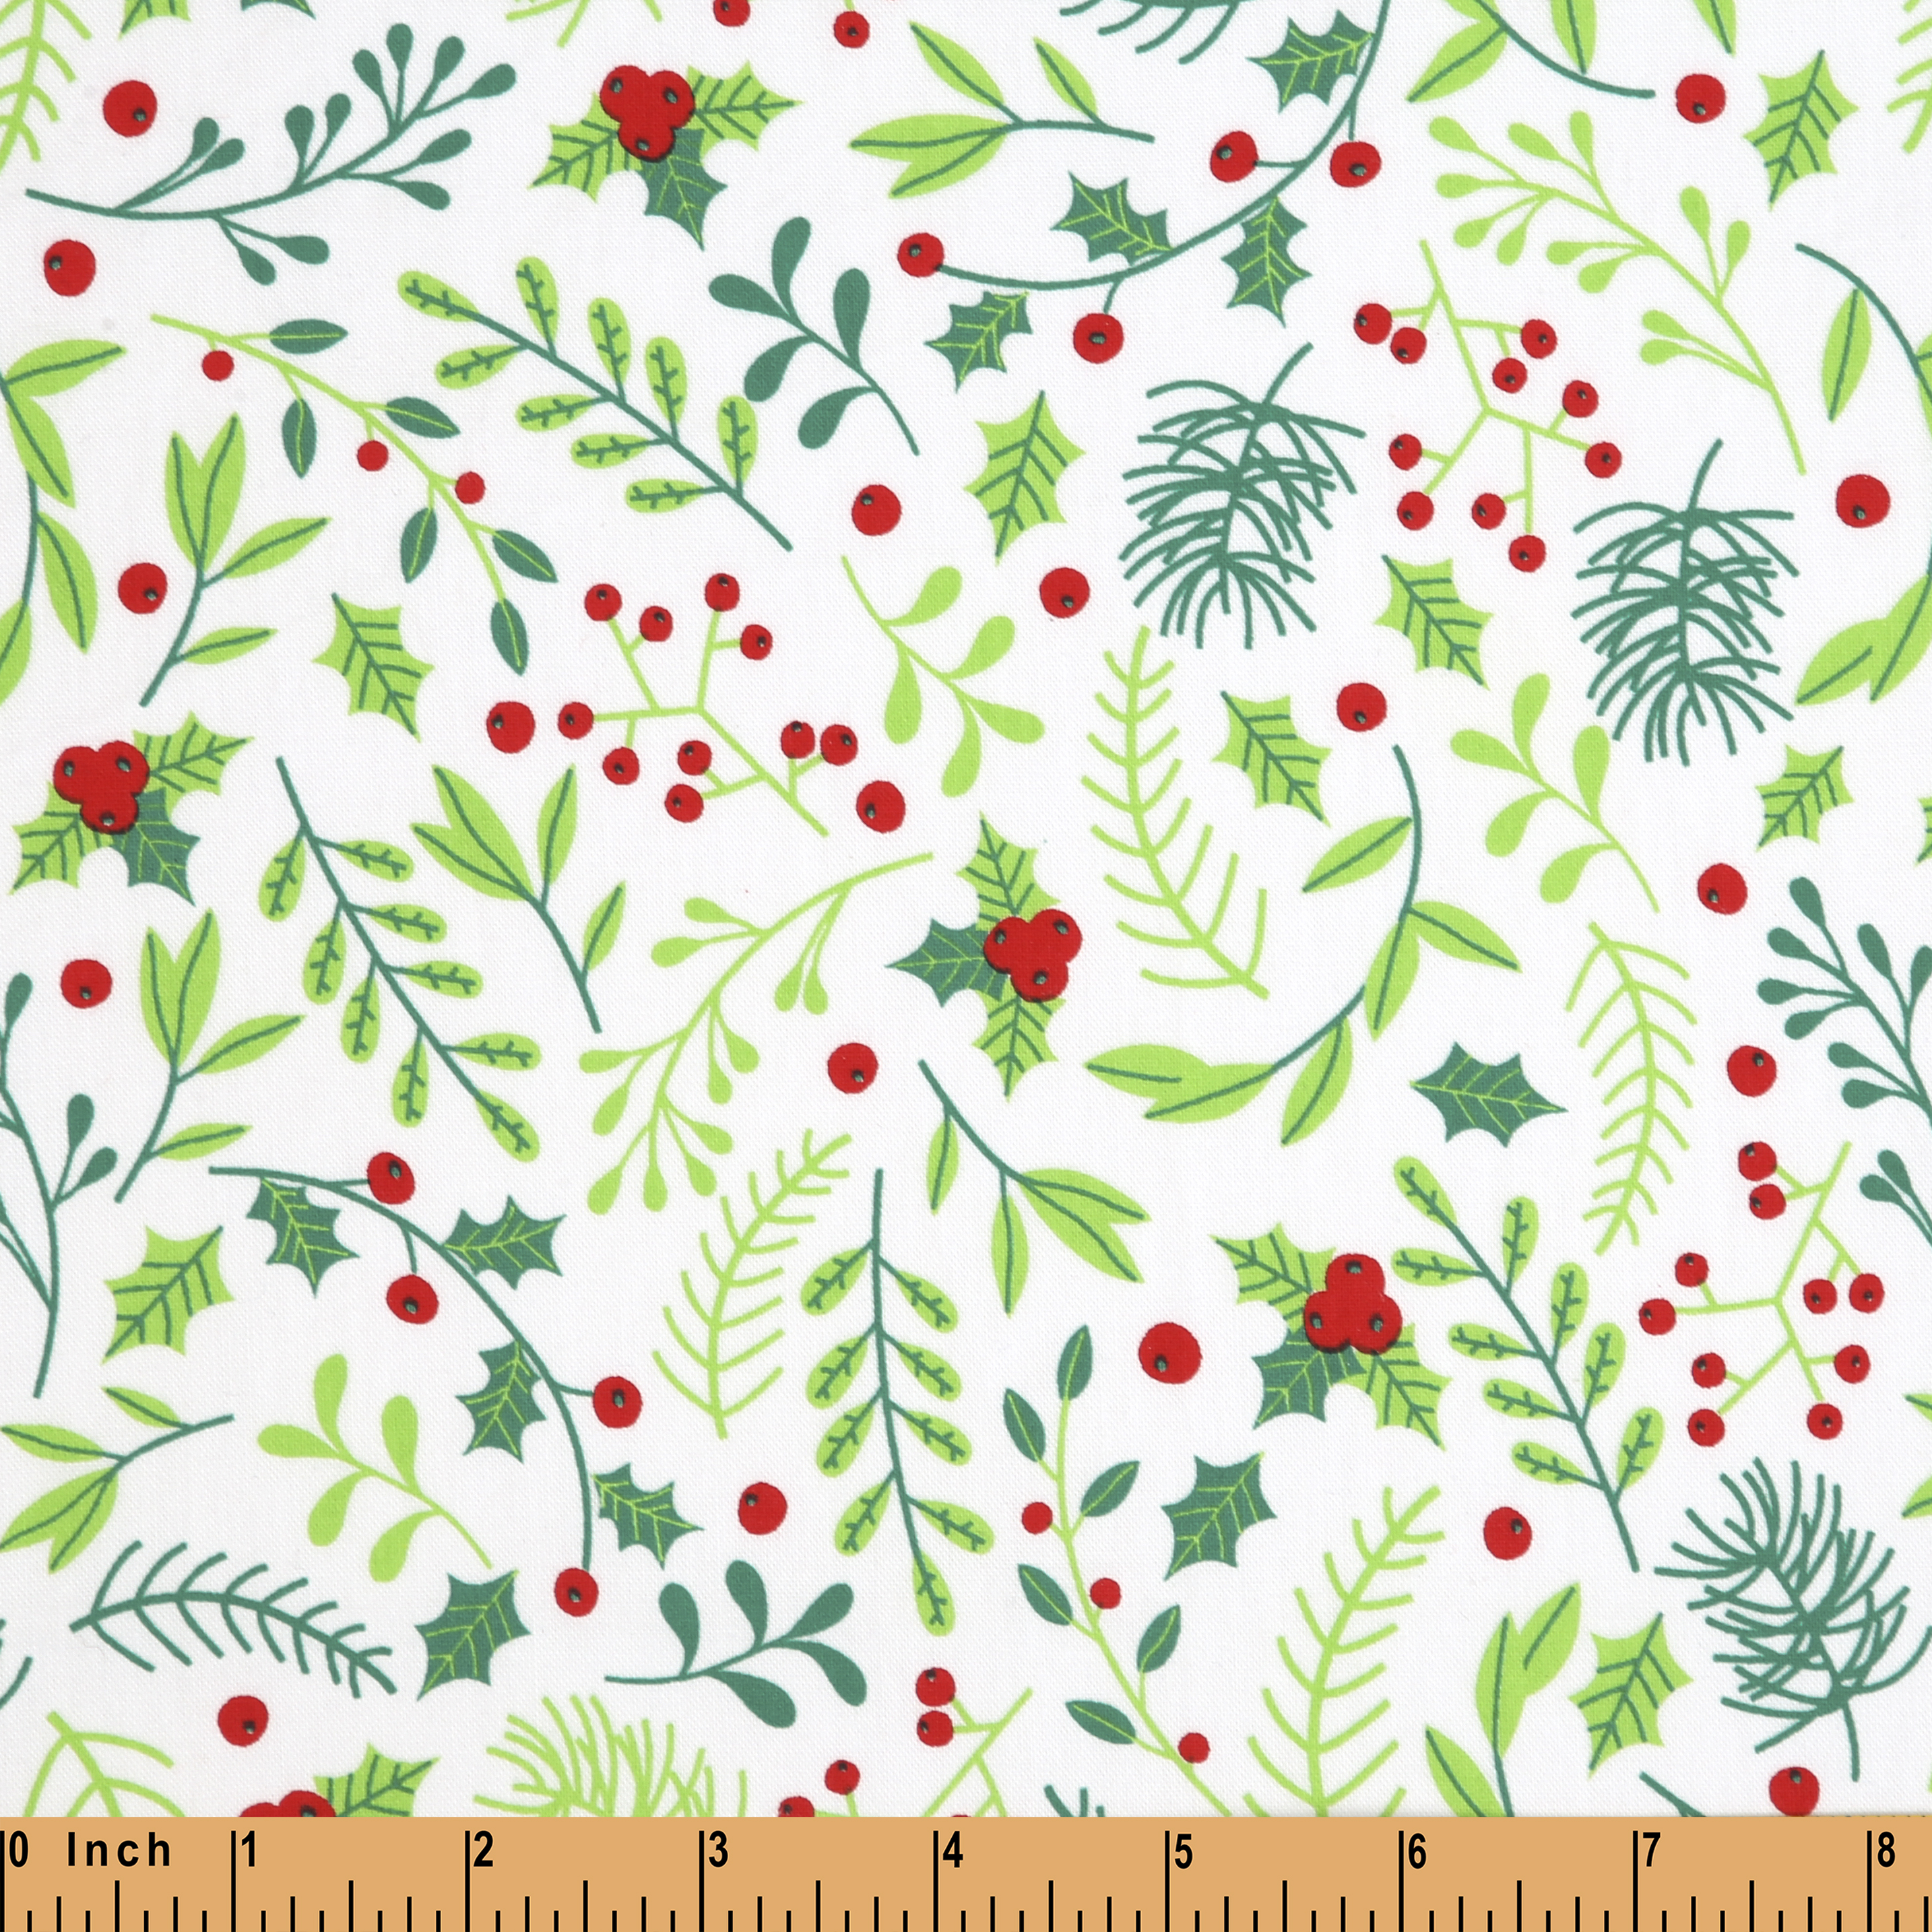 F95-Christmas floral printed fabric (100% cotton)